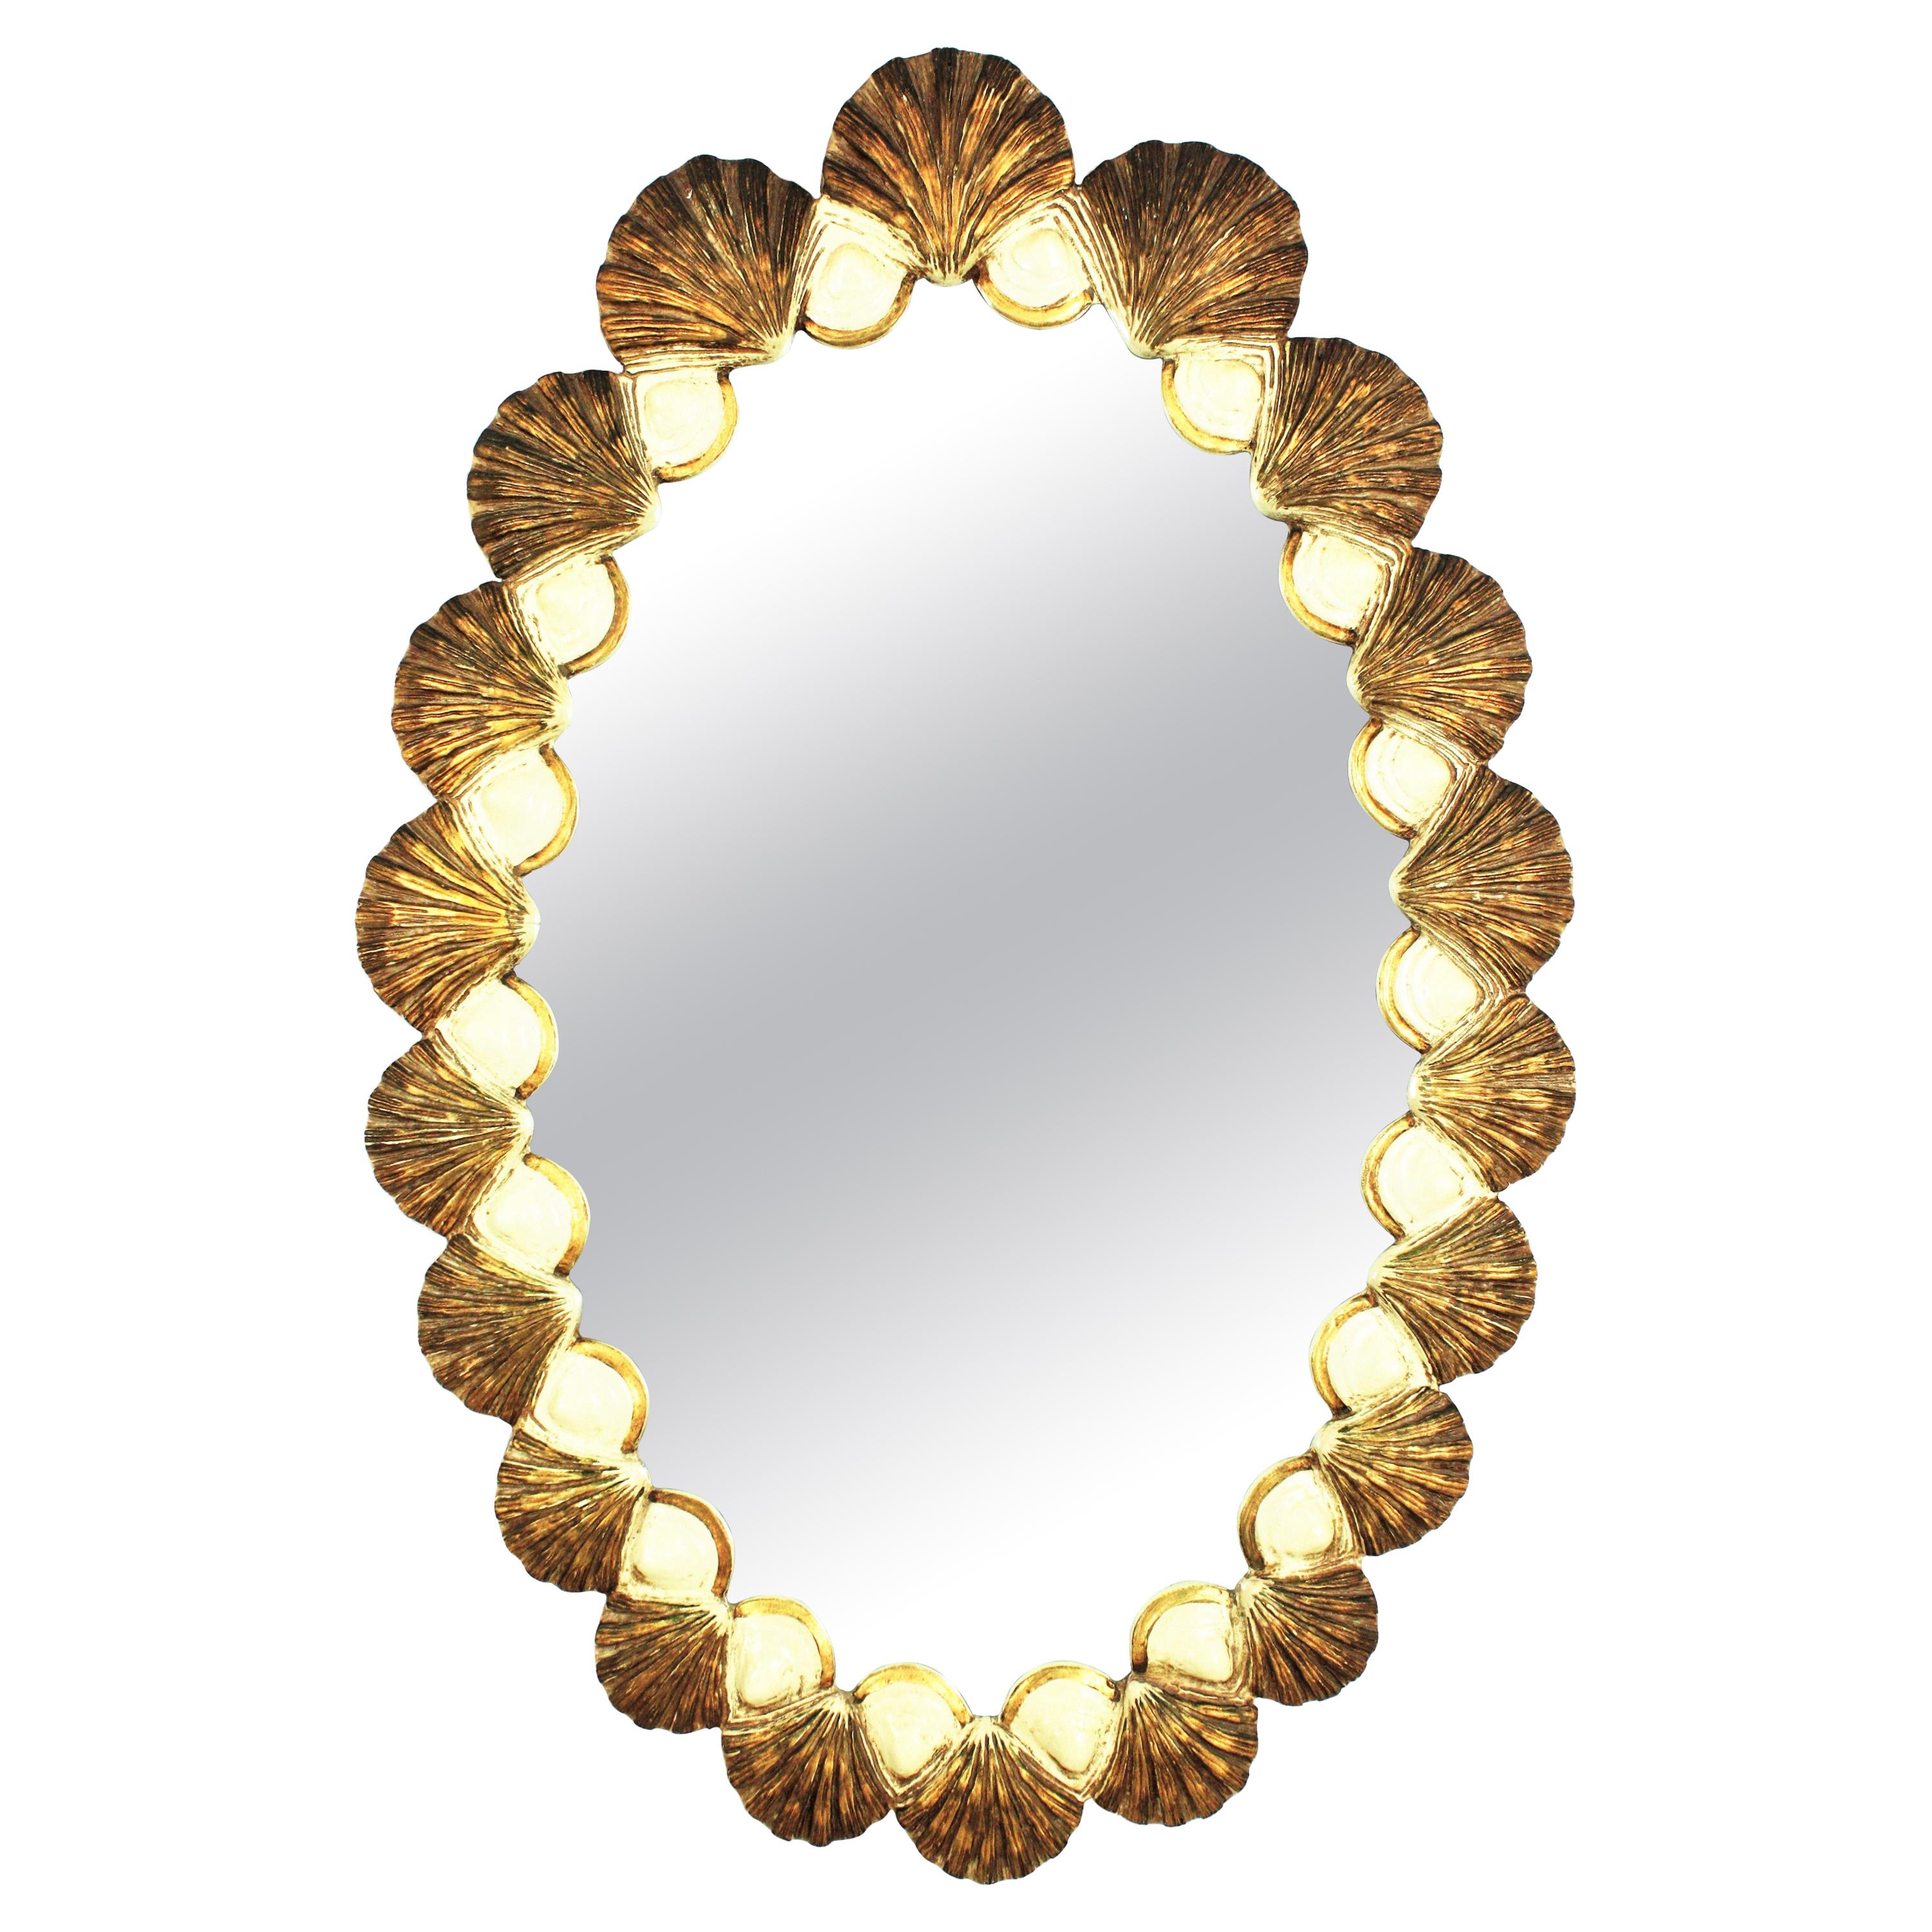 Giltwood and Beige Oval Carved Shell Mirror by Francisco Hurtado